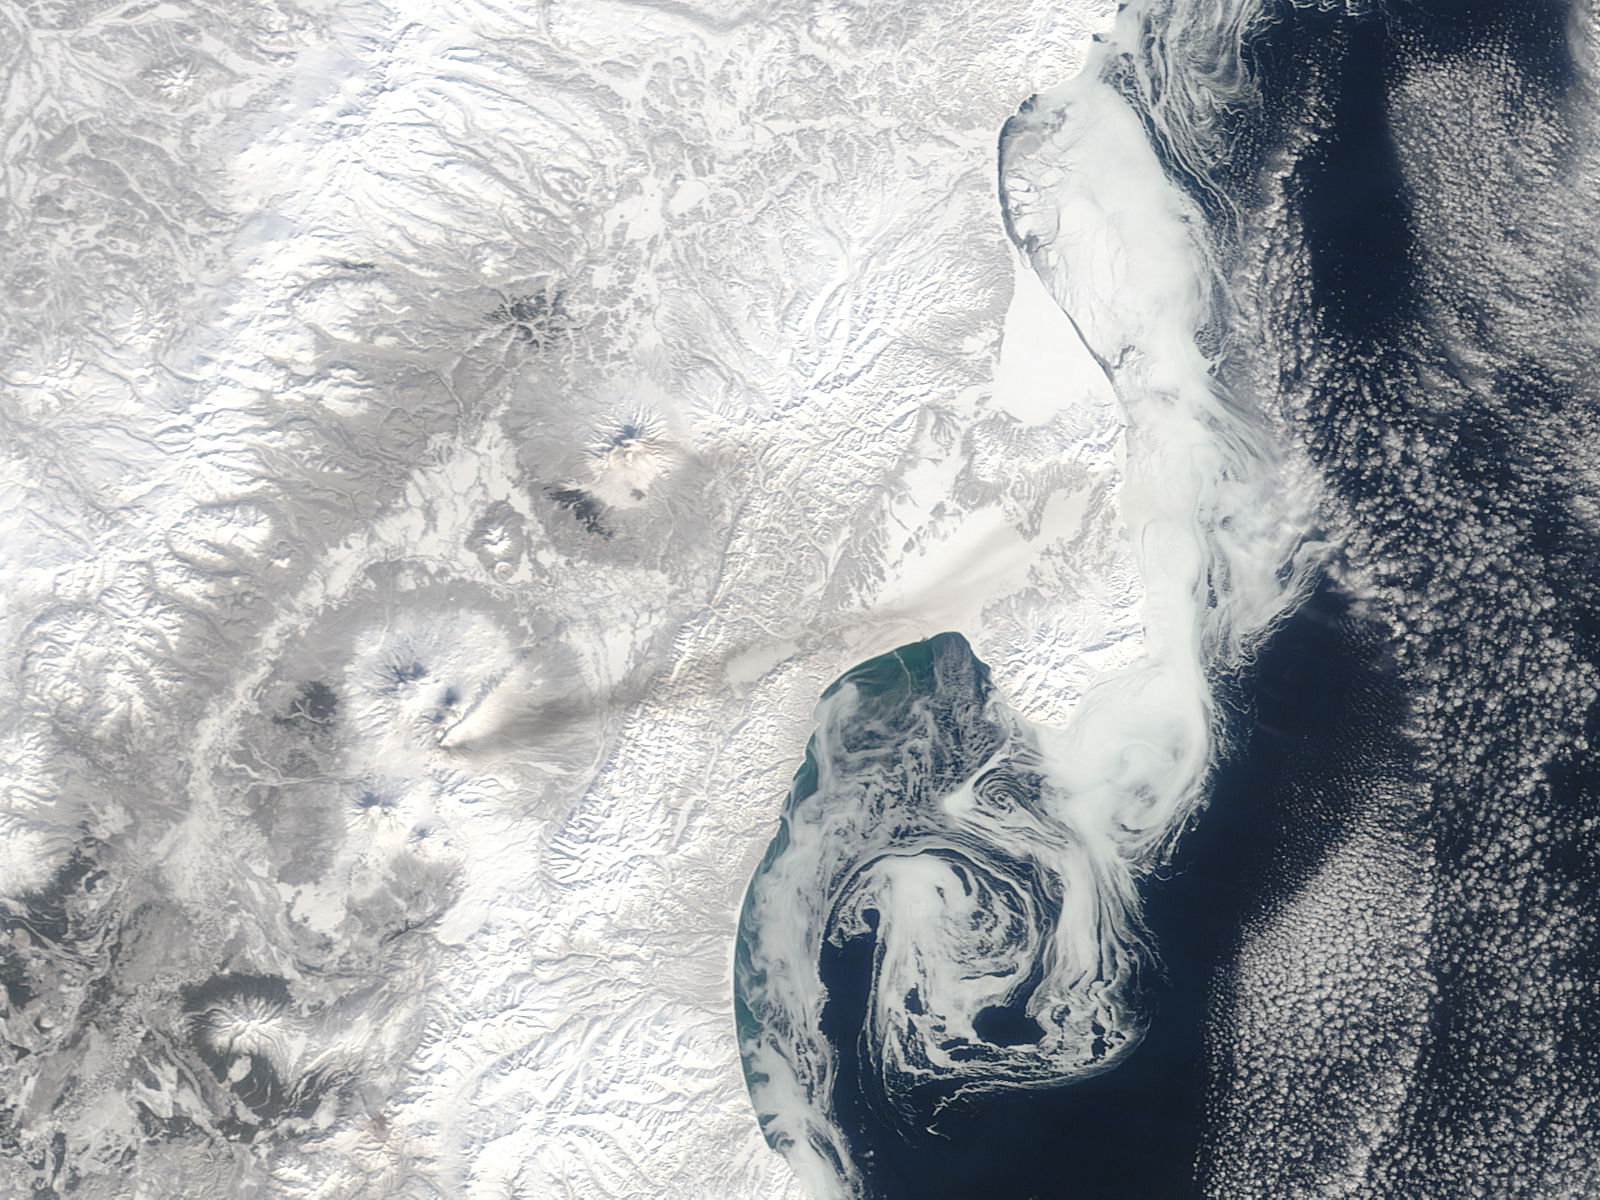 Plume and ash on snow from Bezymianny, Kamchatka Peninsula, eastern Russia - related image preview